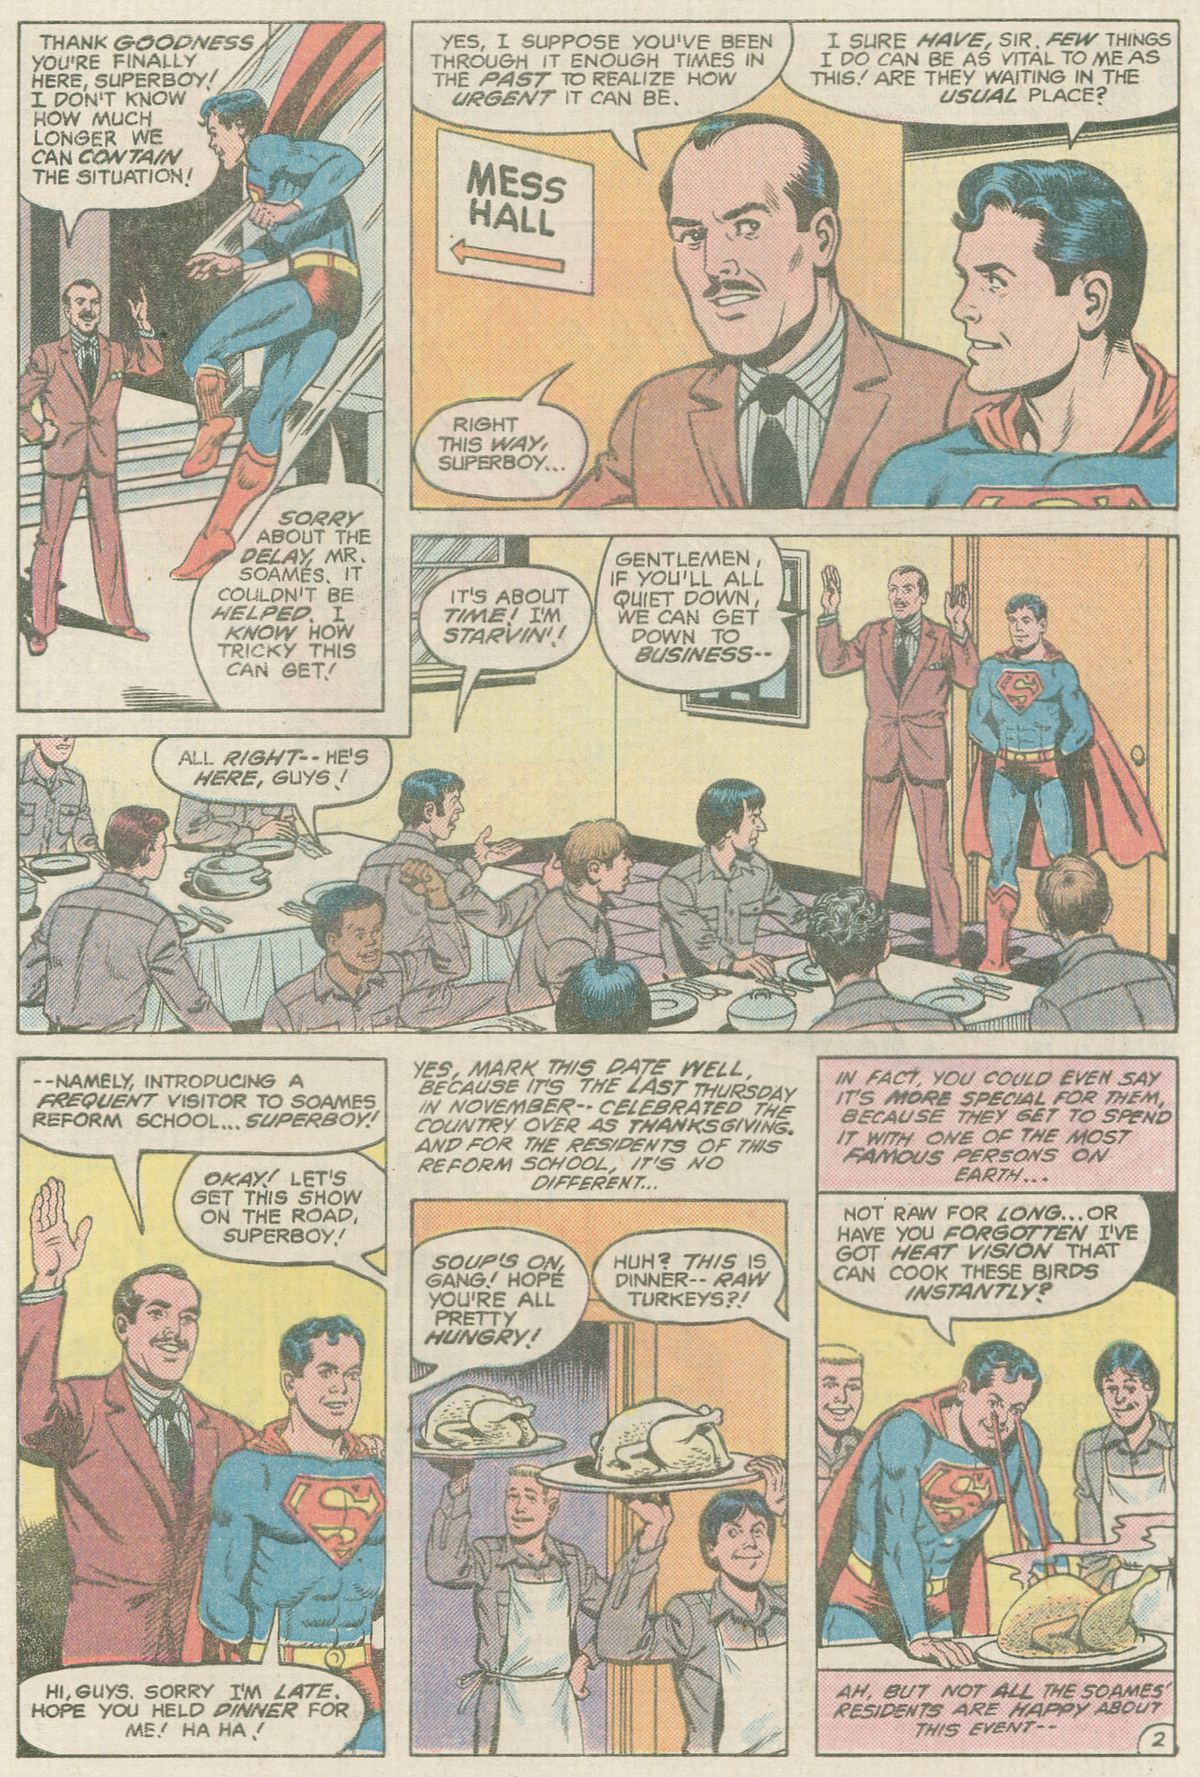 The New Adventures of Superboy 38 Page 2